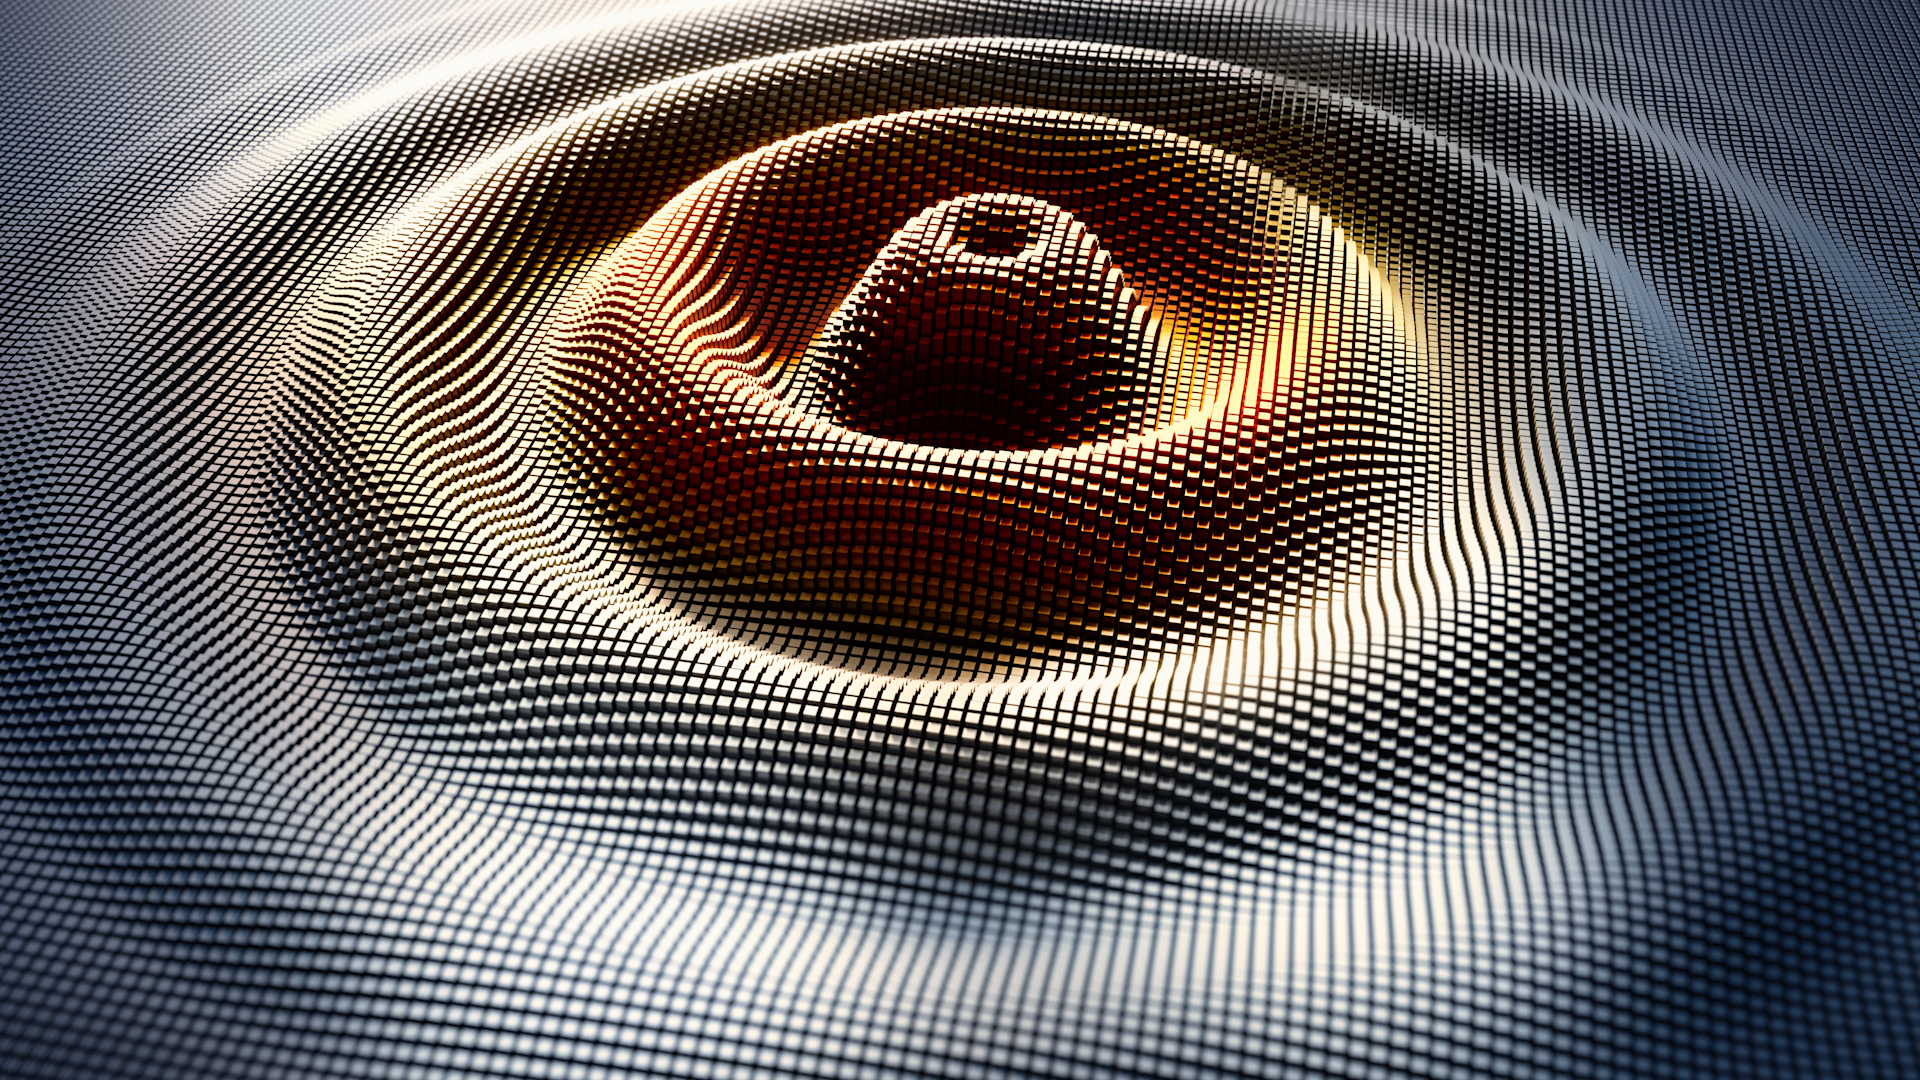 Interference and waves in a digital raster micro structure - 3D illustration